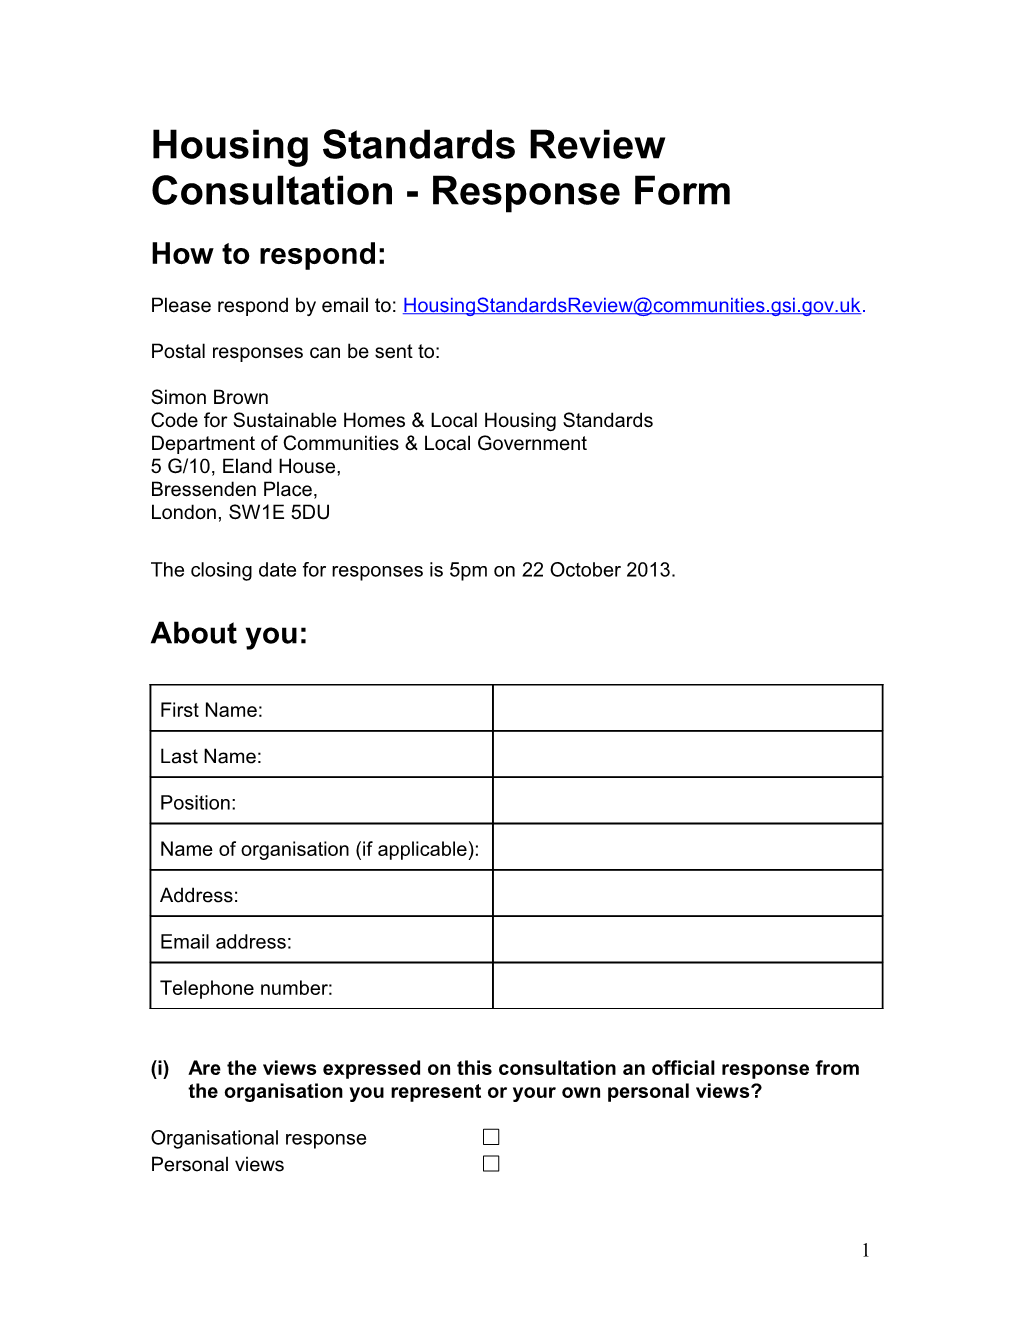 Housing Standards Review Consultation - Response Form